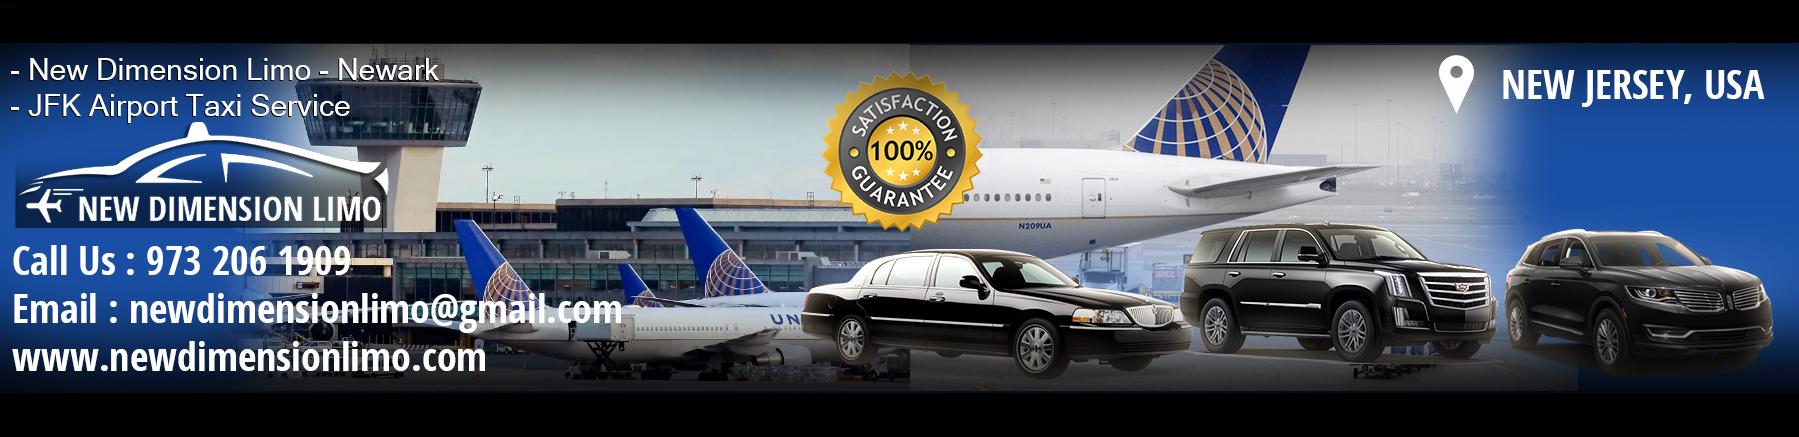 New Dimension Limo - Newark|JFK Airport Taxi Service